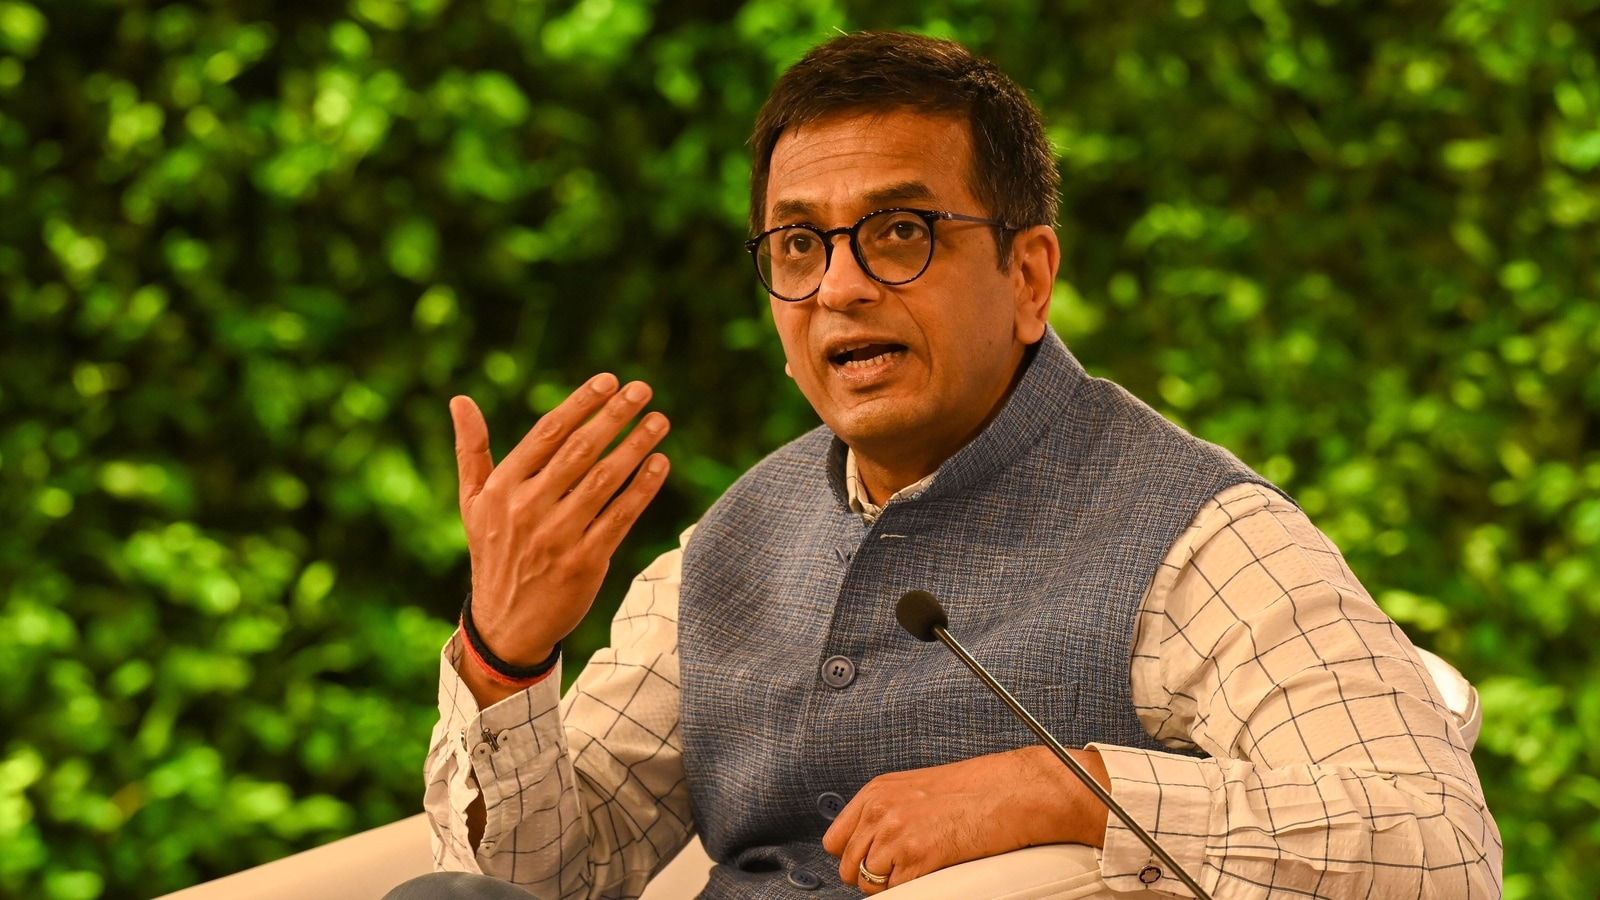 CJI DY Chandrachud speaks on AI, poses question on “ethical treatment of these technologies”